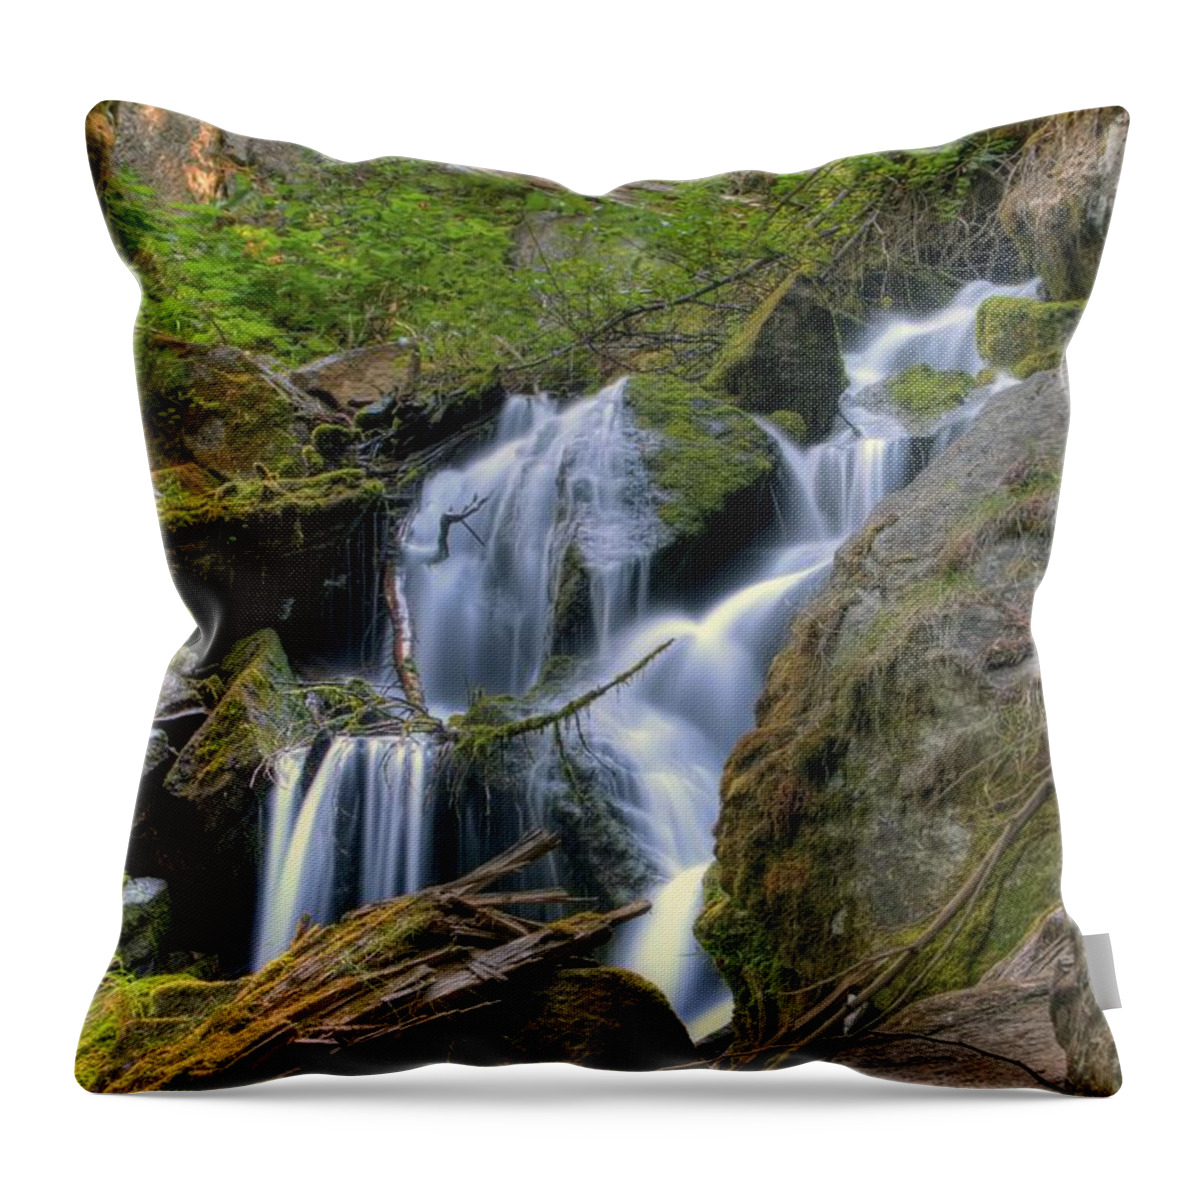 Hdr Throw Pillow featuring the photograph Tranquility by Brad Granger